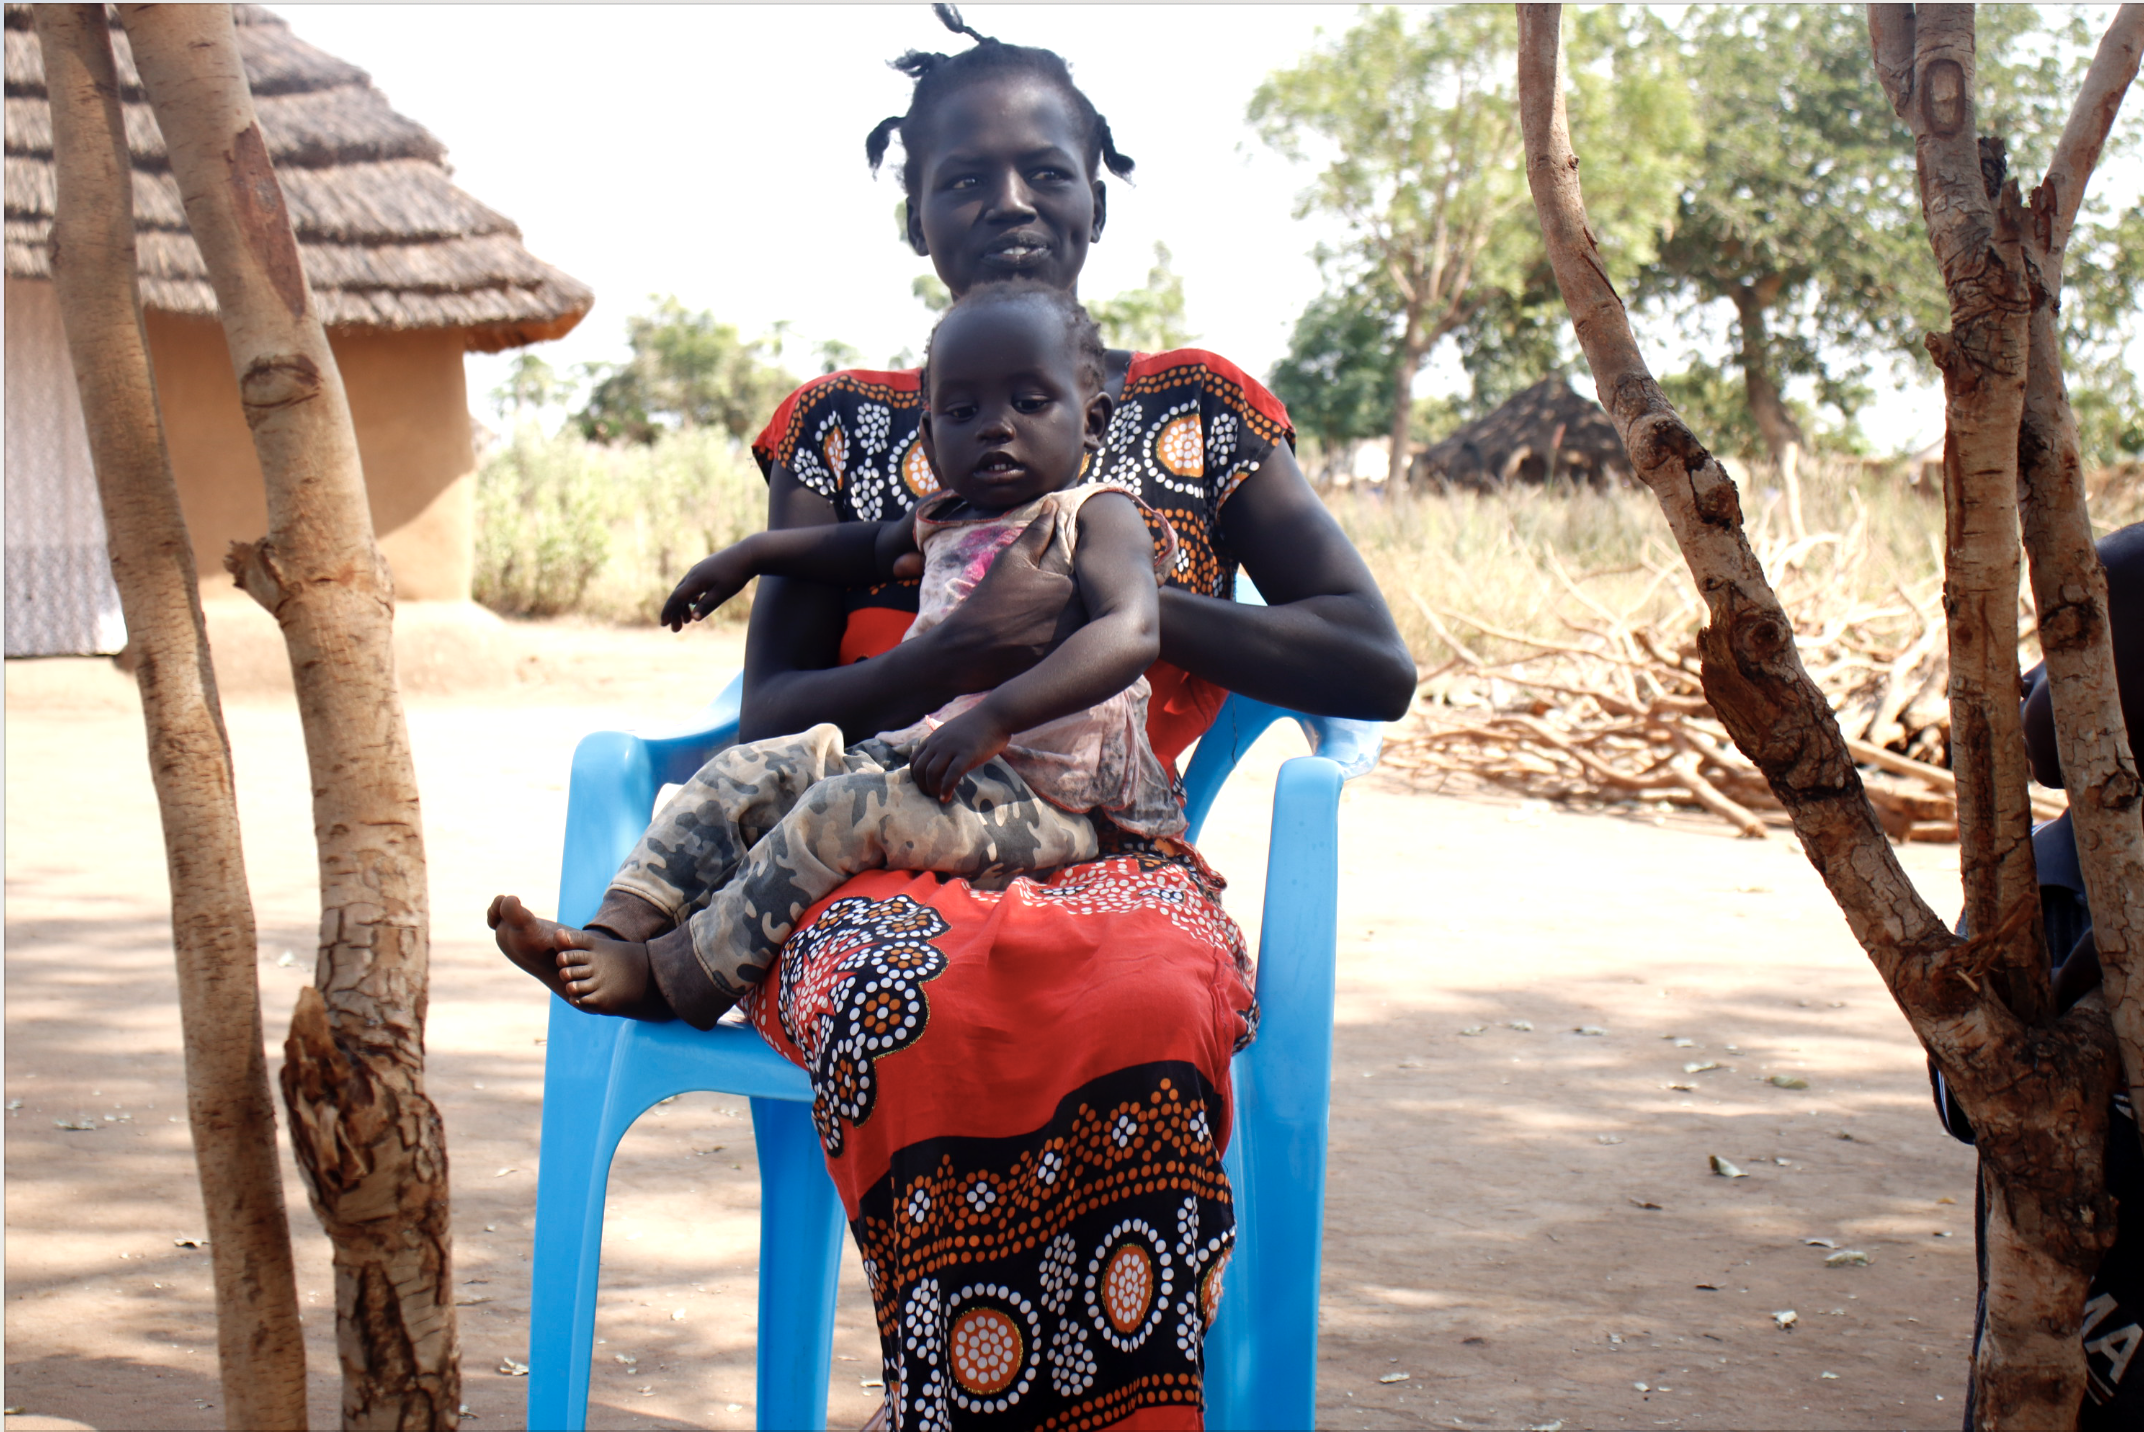 Tabitha with her baby. After overcoming the mental distress, Tabitha is now able to take good care for her children. Photo Credit: TPO Uganda